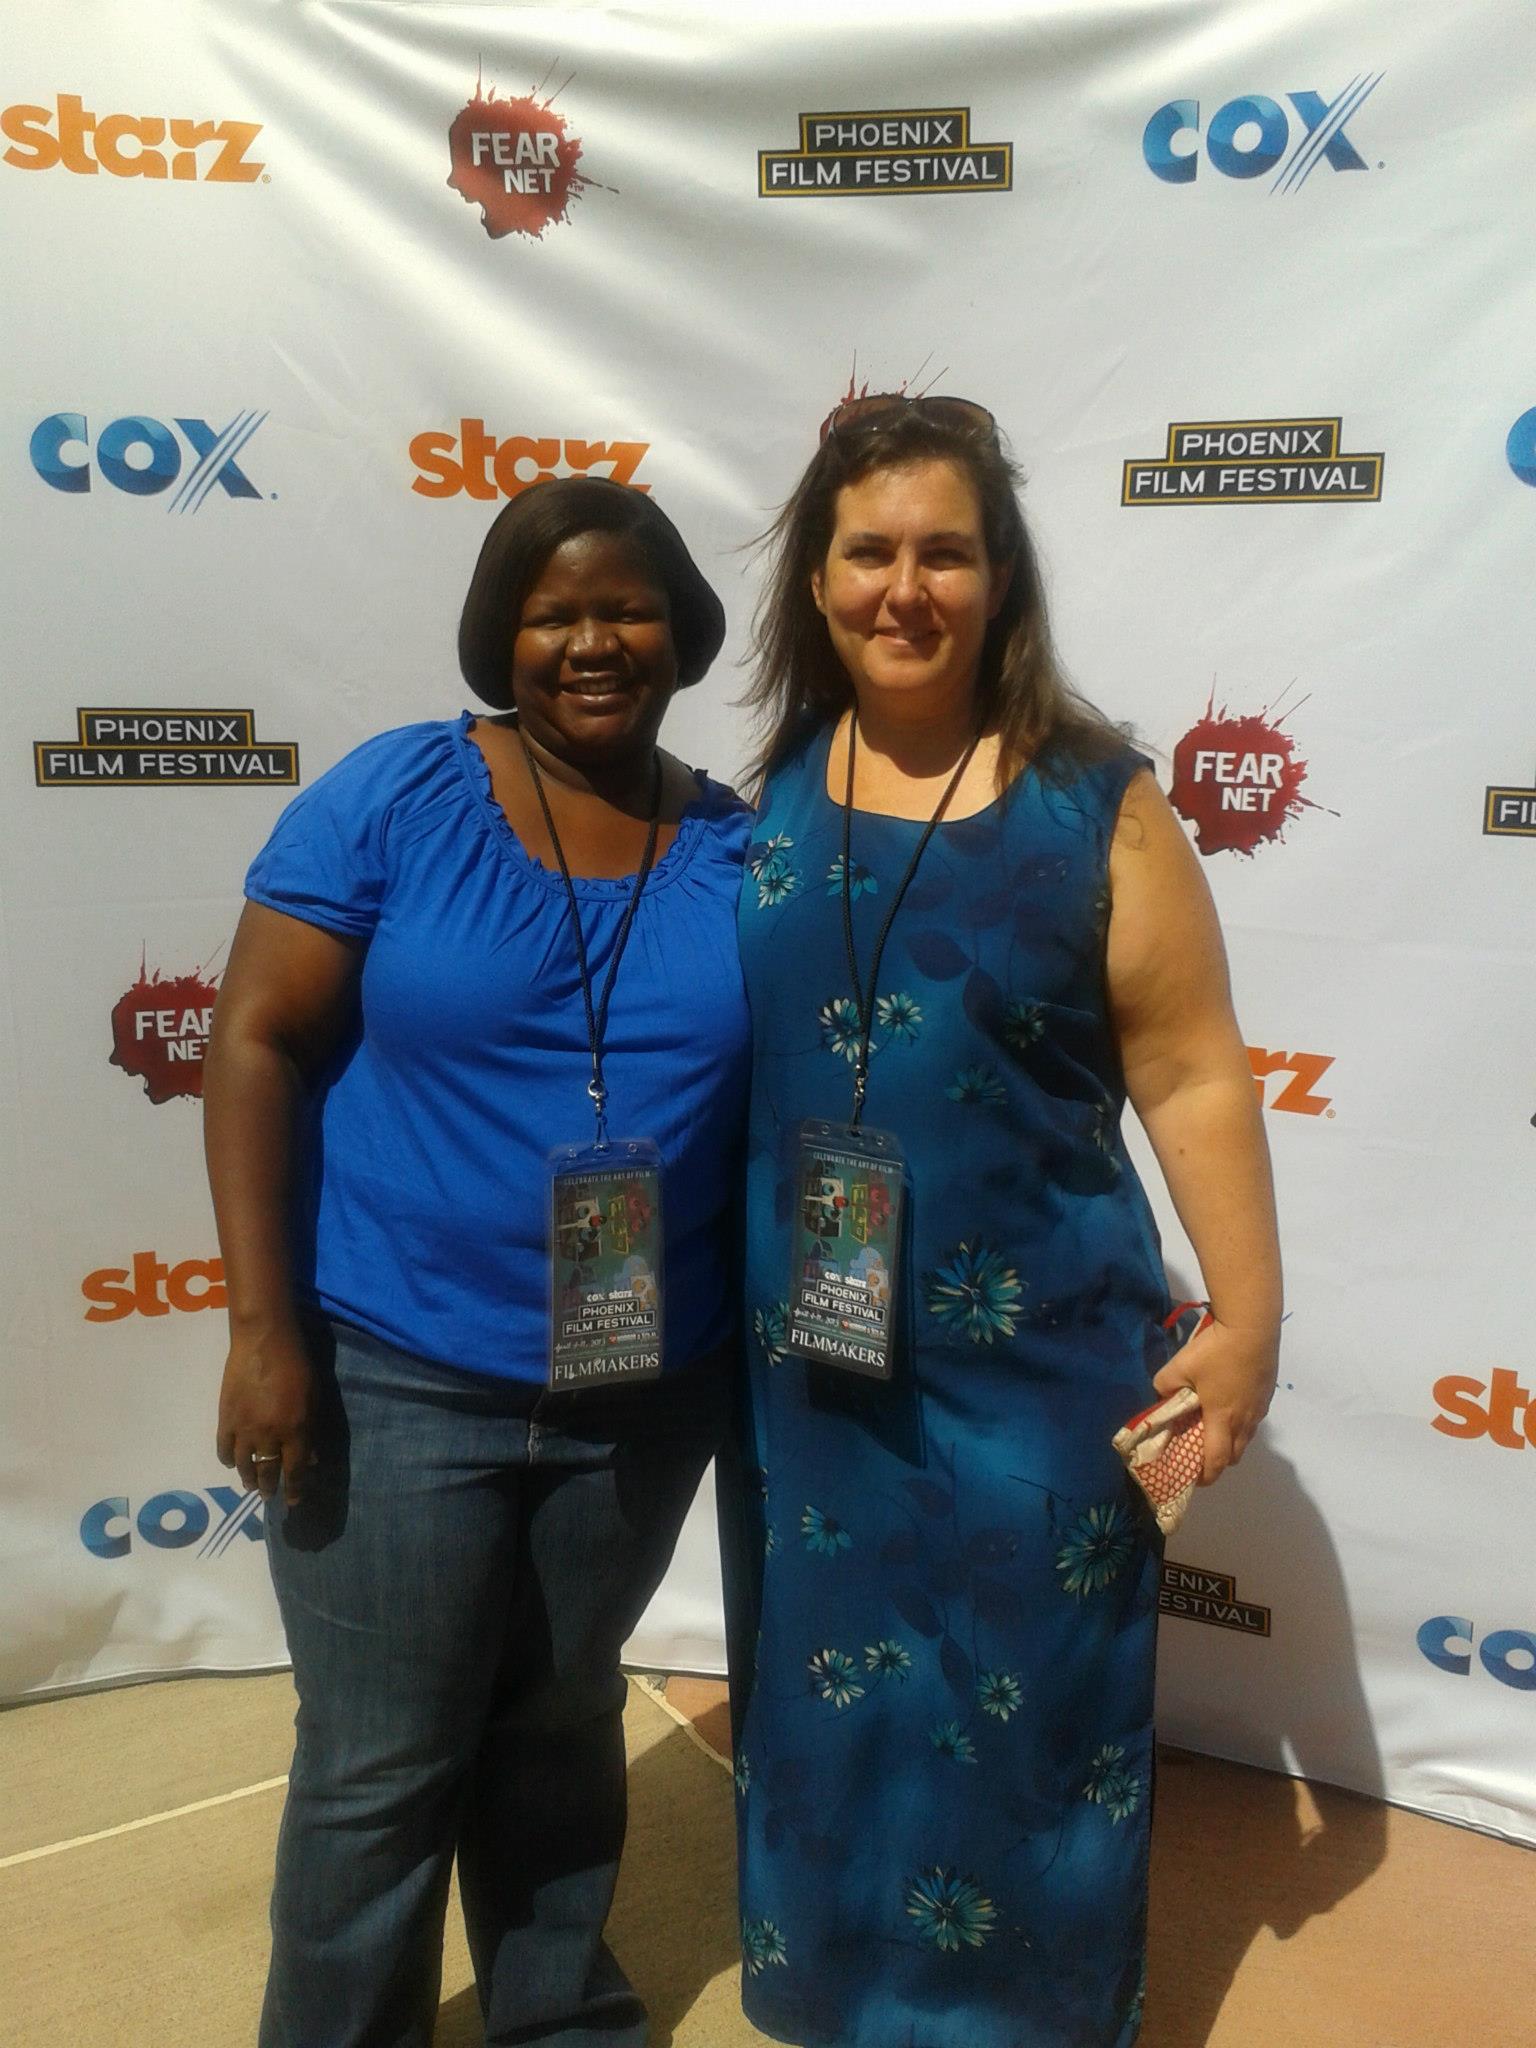 Andrea Magwood and Lee Quarrie at the 2013 Phoenix Film Festival.